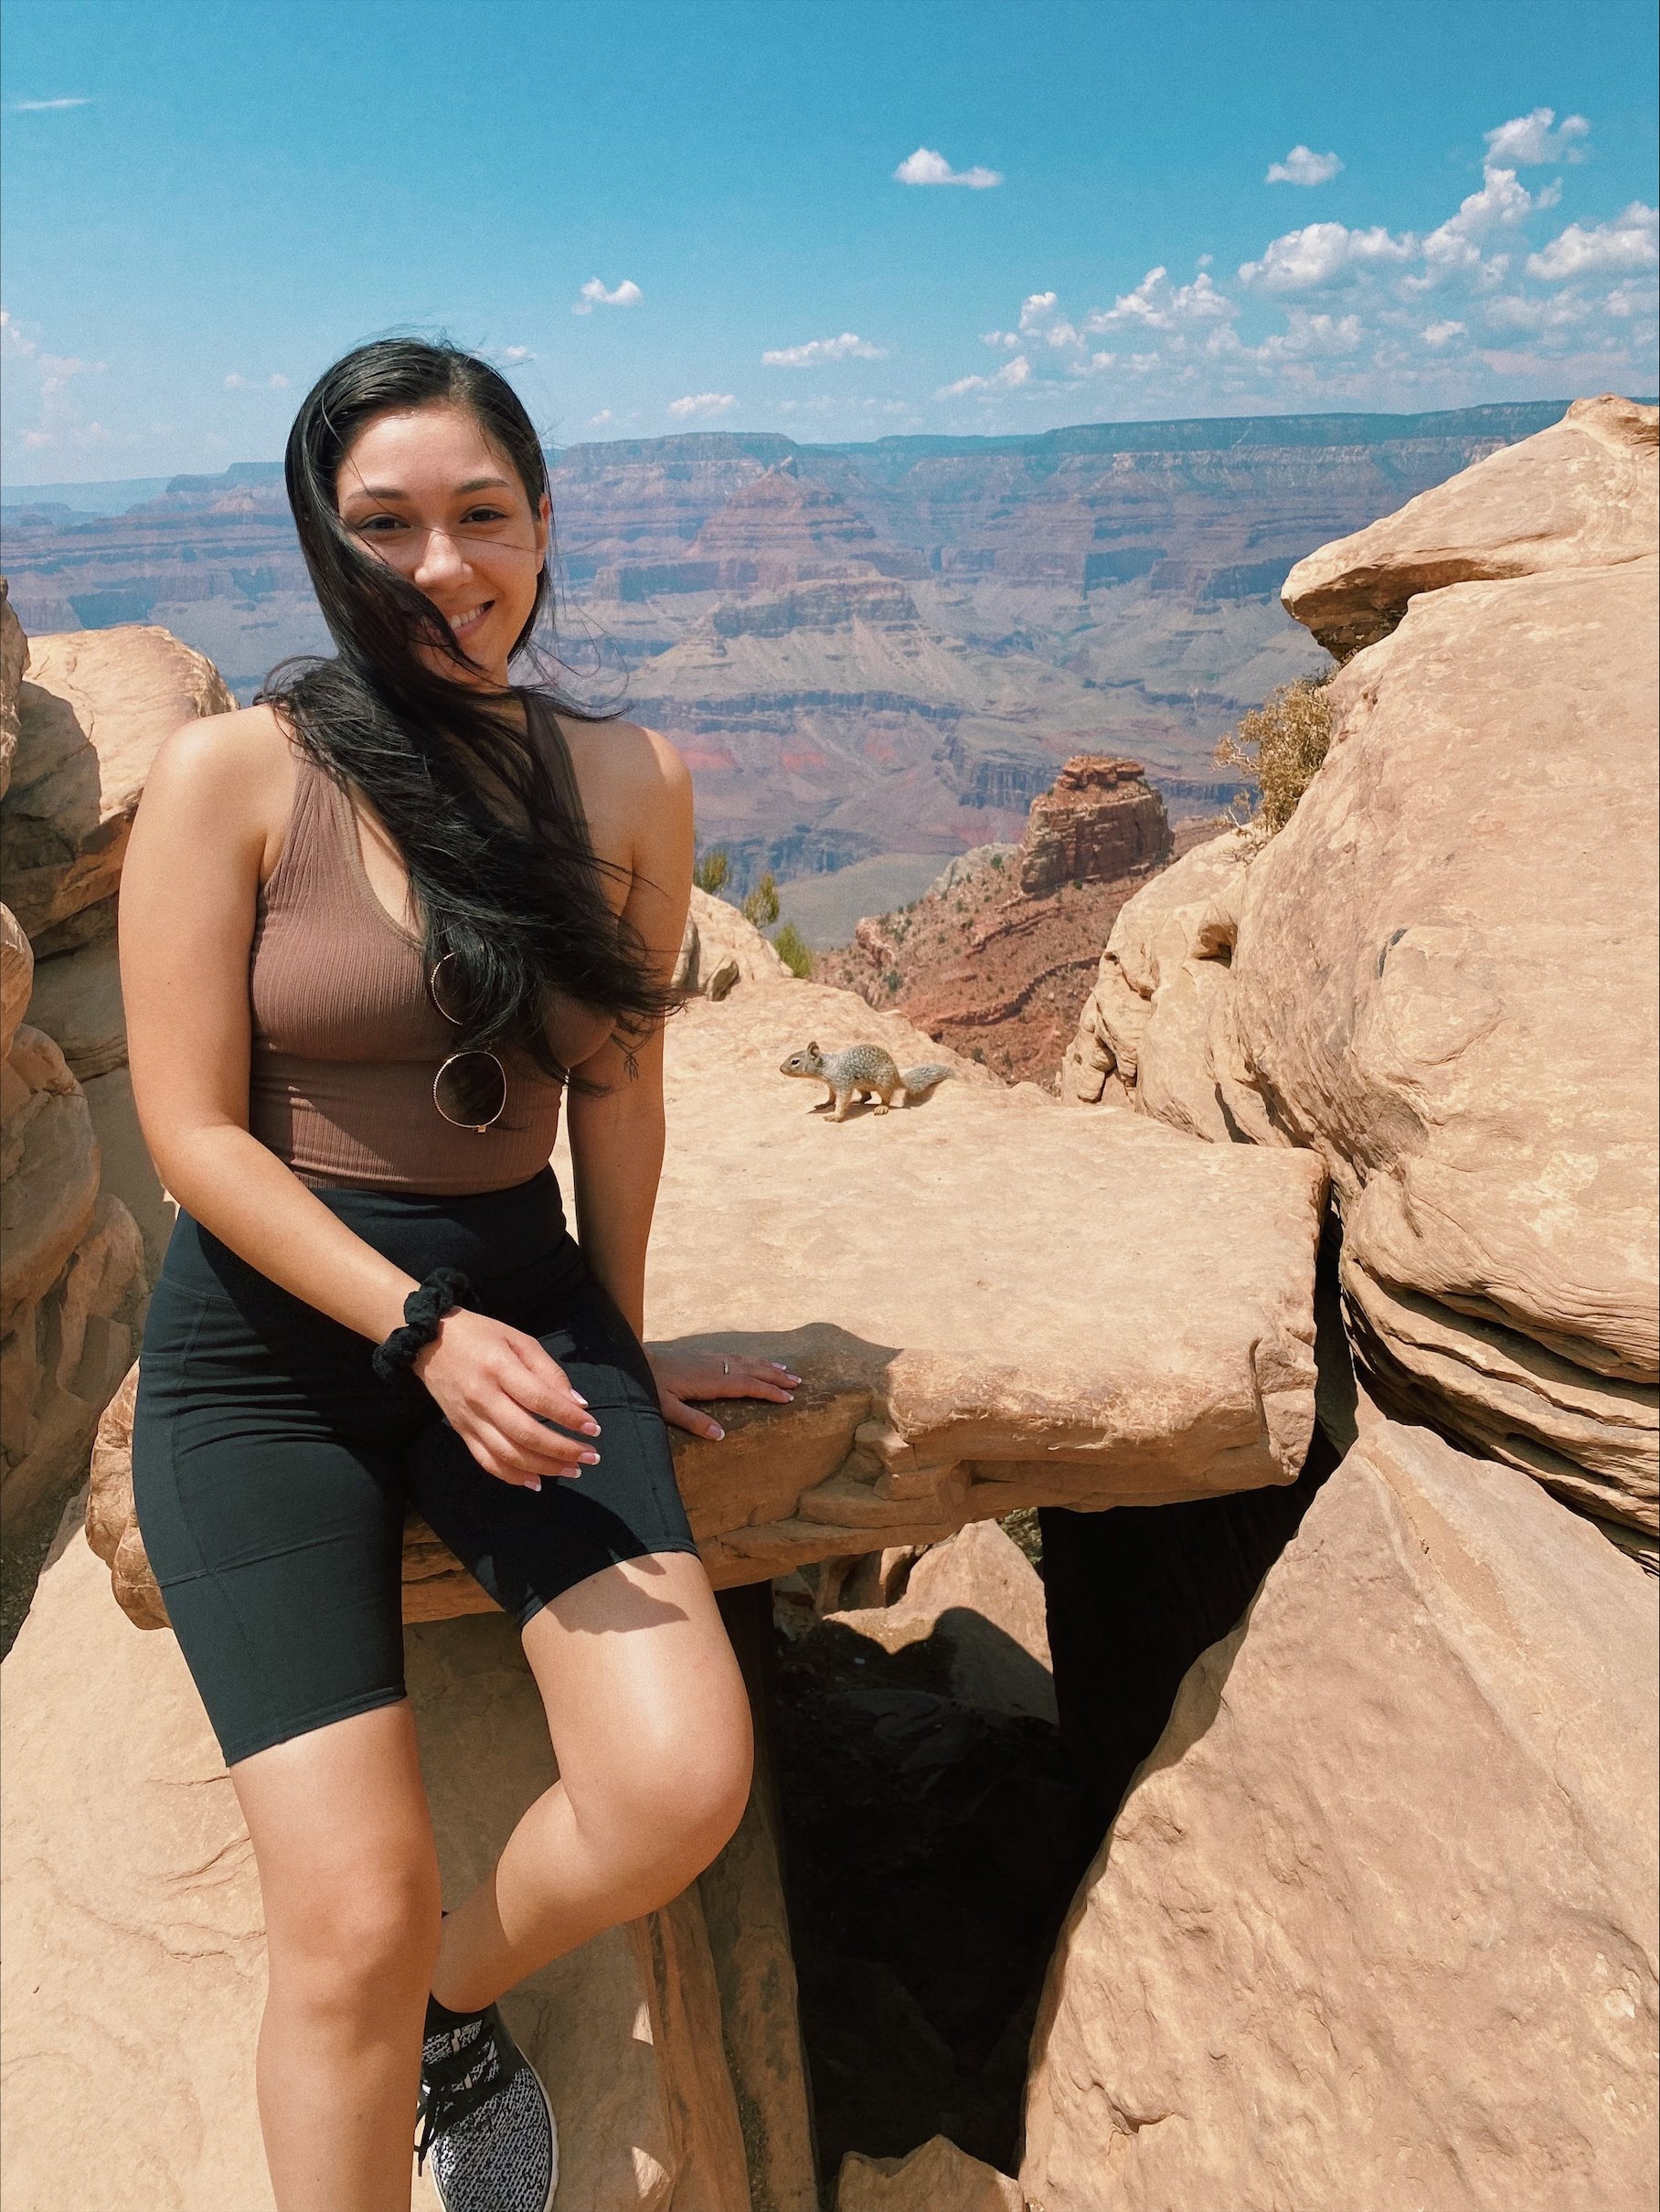 Grand canyon picture.jpeg